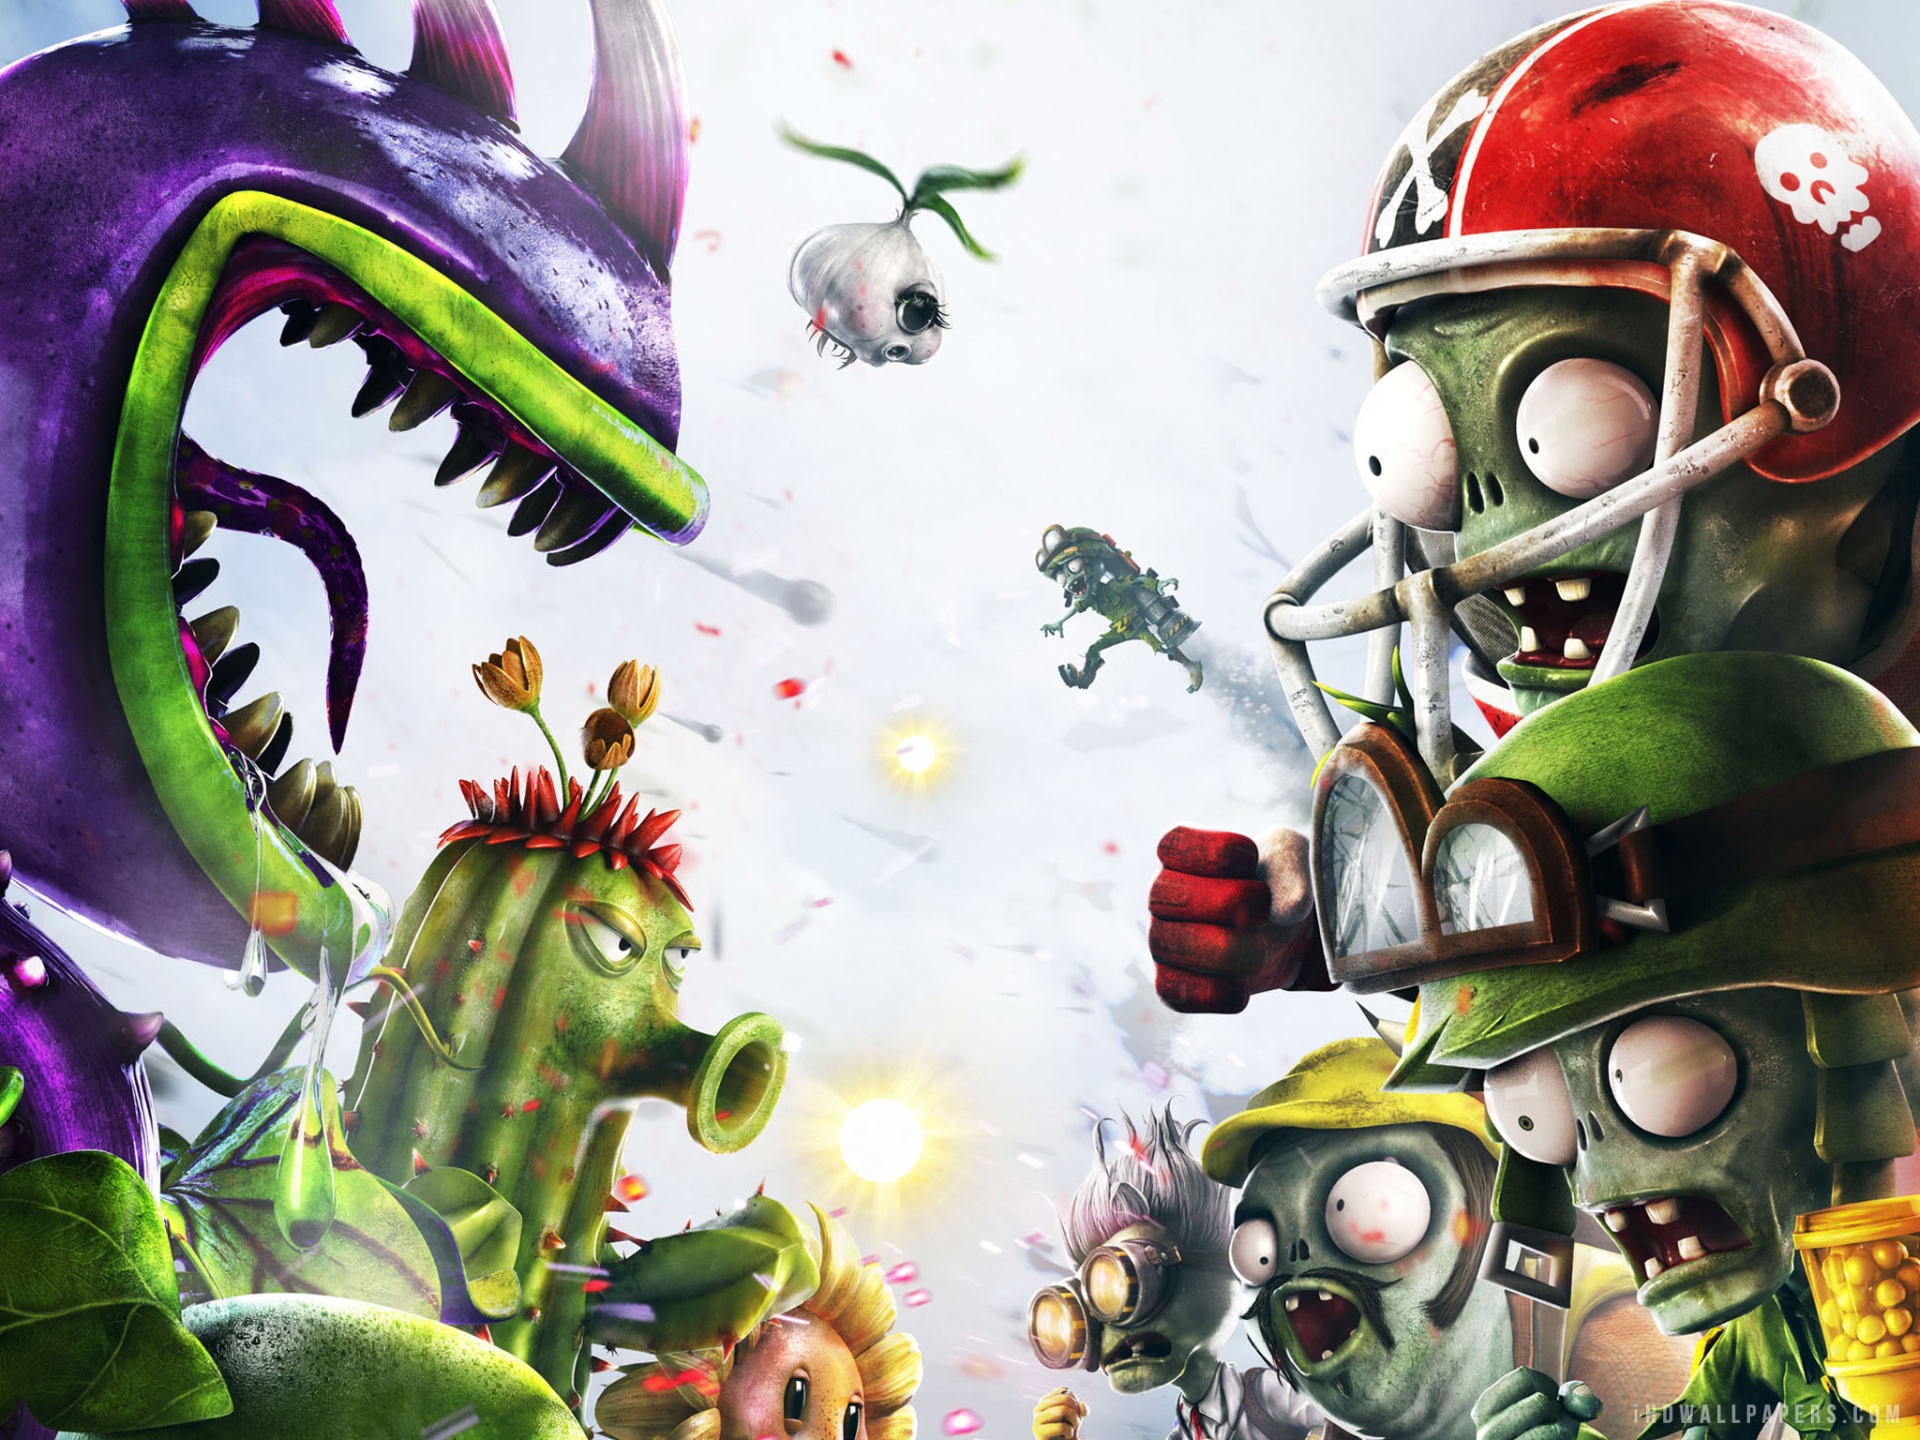 Plants Vs. Zombies Wallpapers